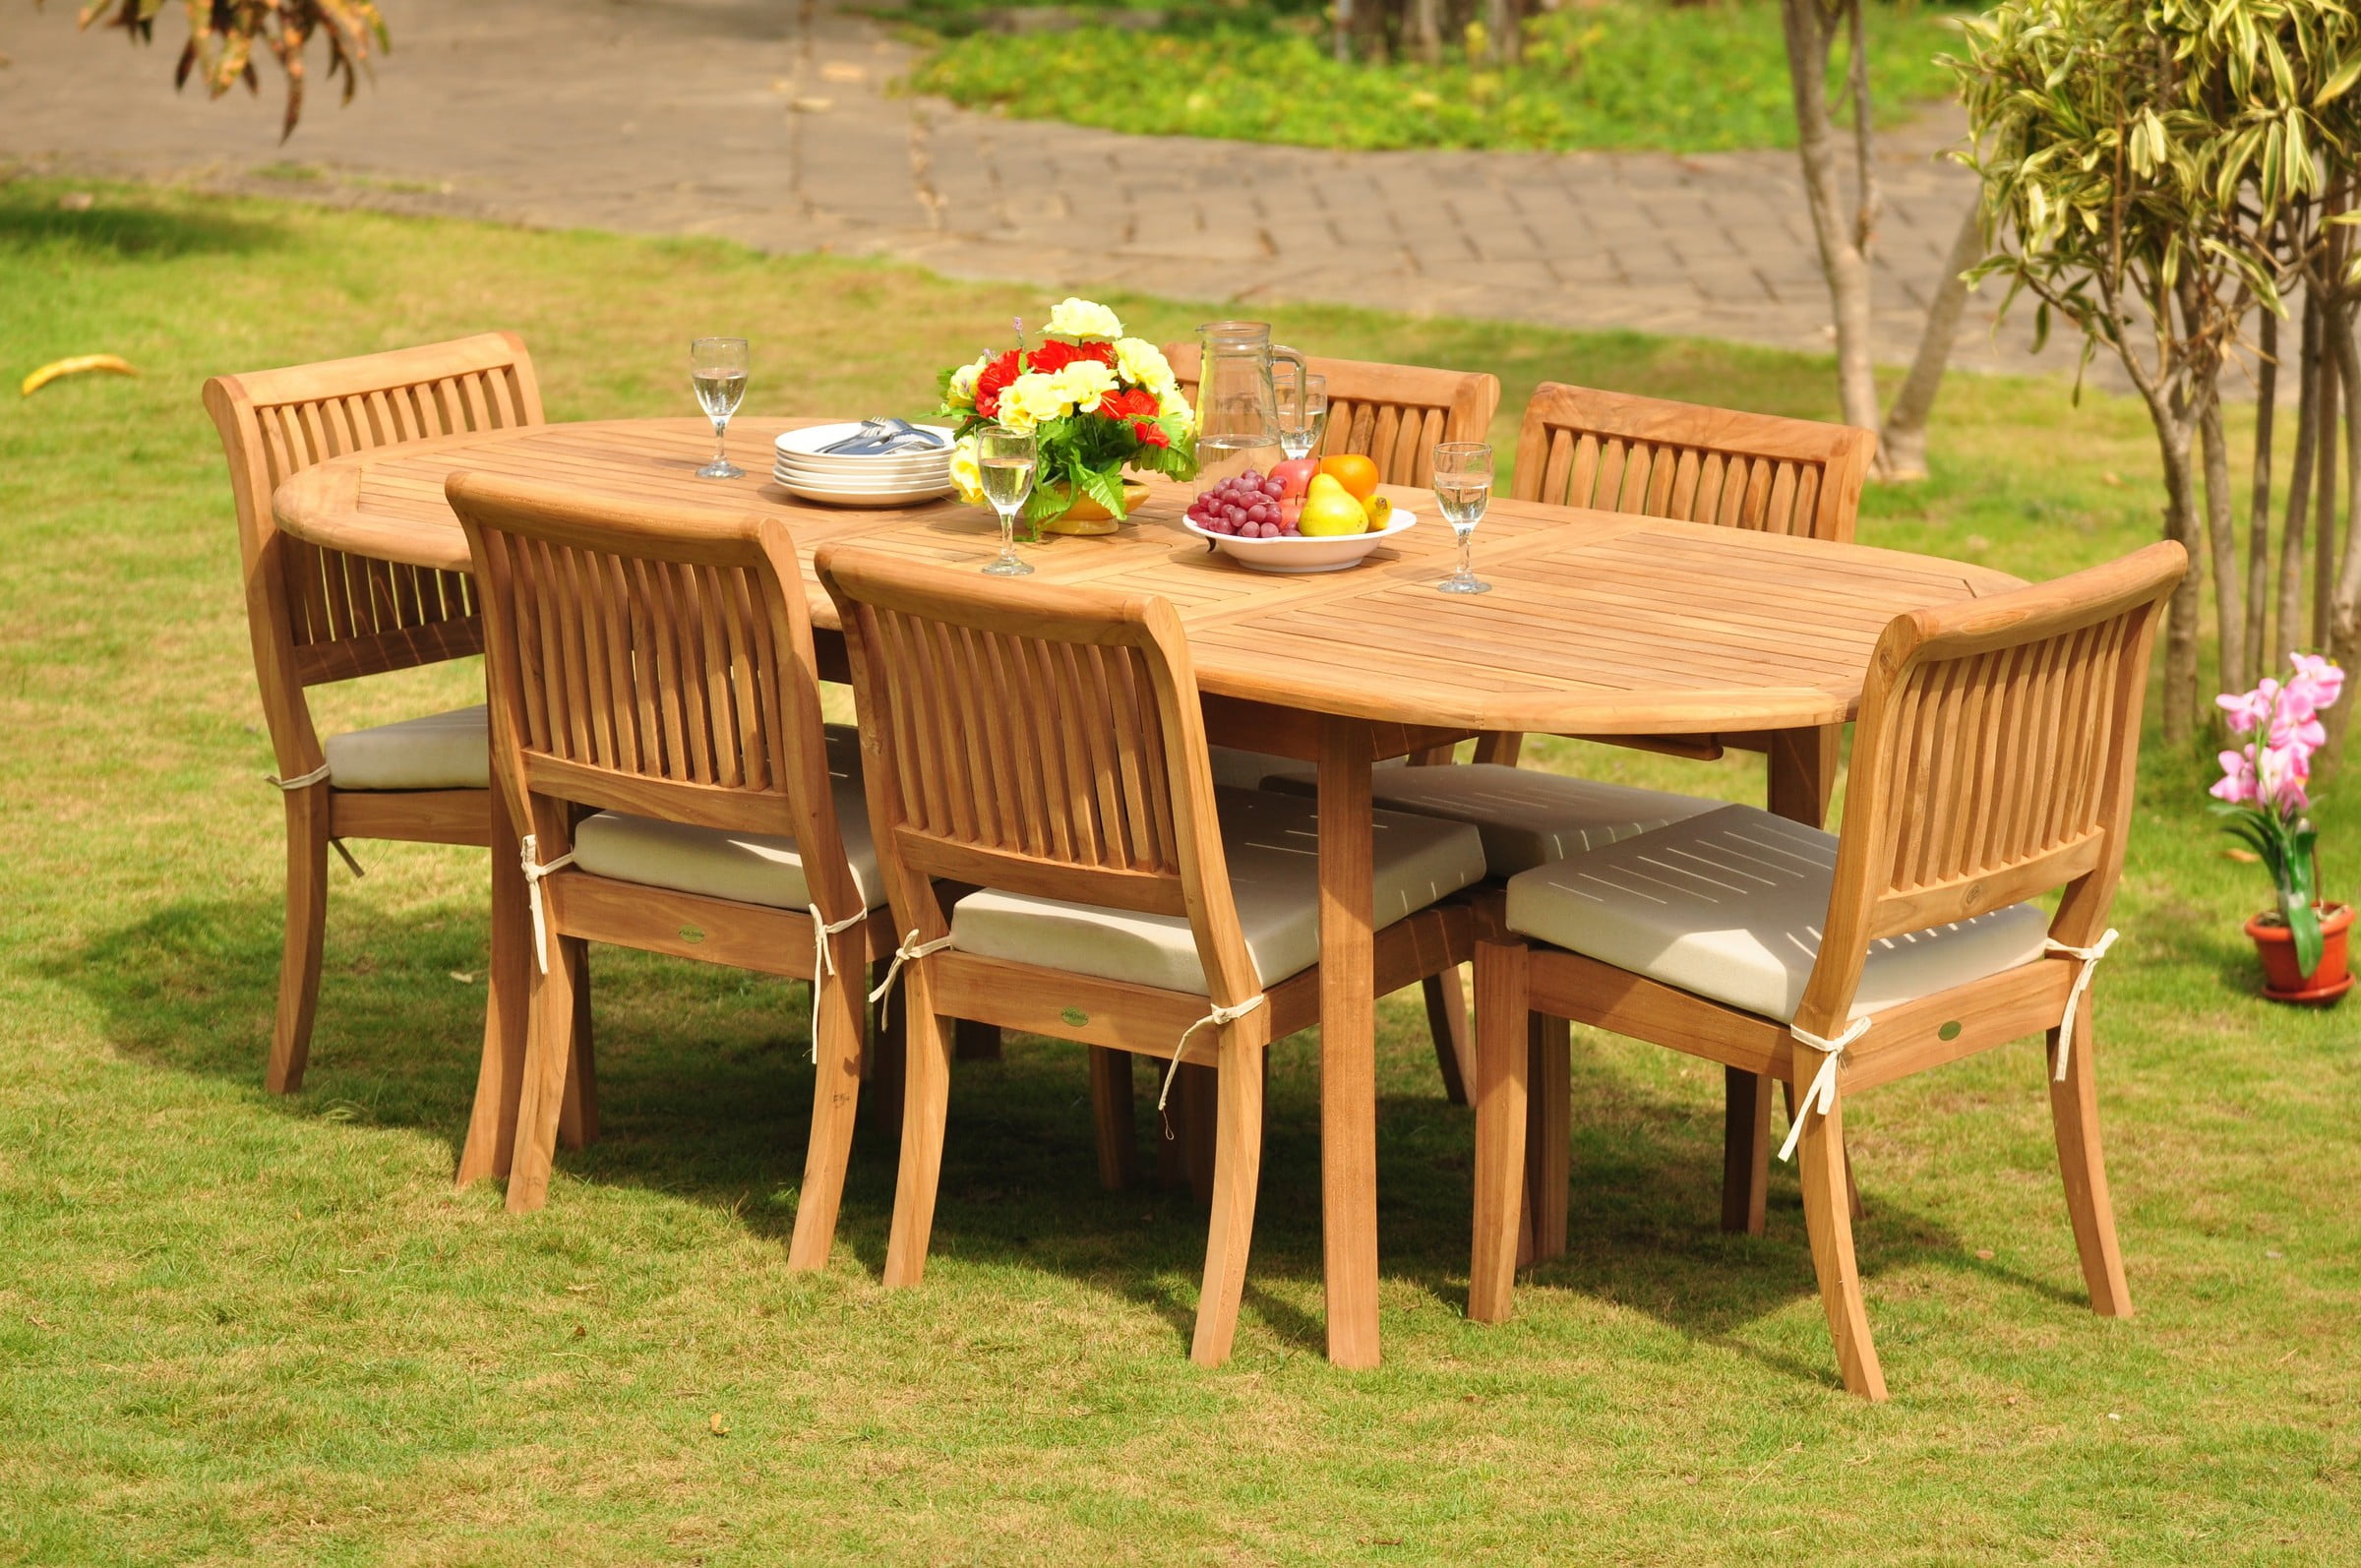 Teak Dining Table For 6: Perfect For Family Meals